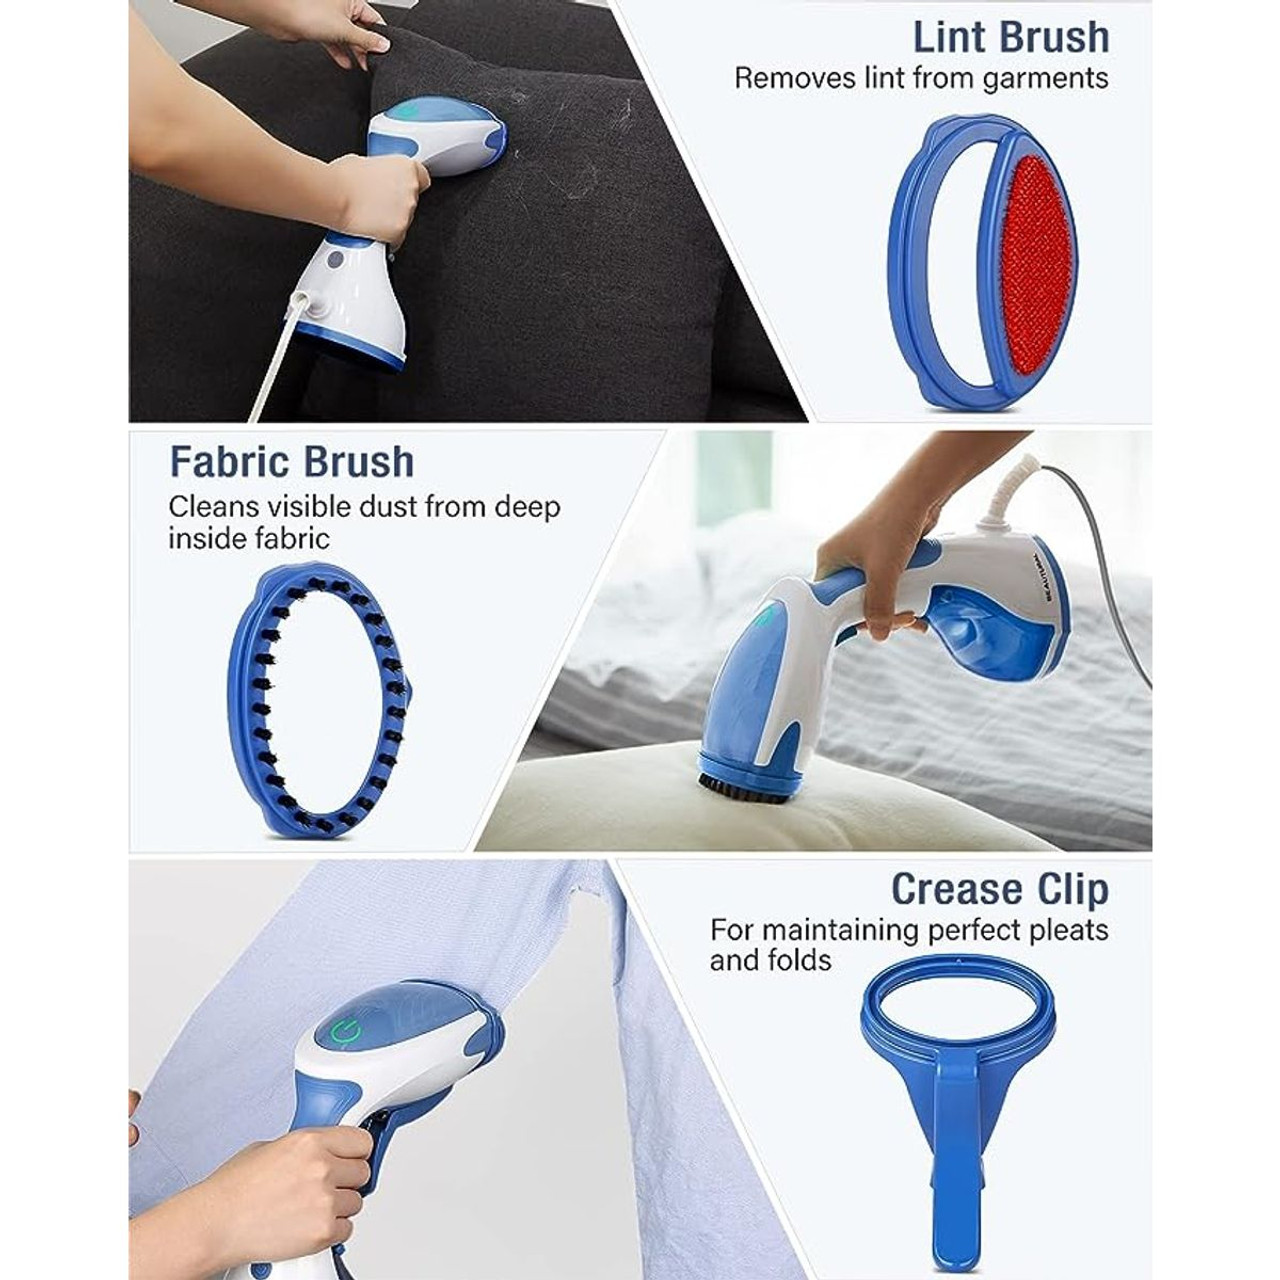 BEAUTURAL Portable Handheld Garment Steamer product image